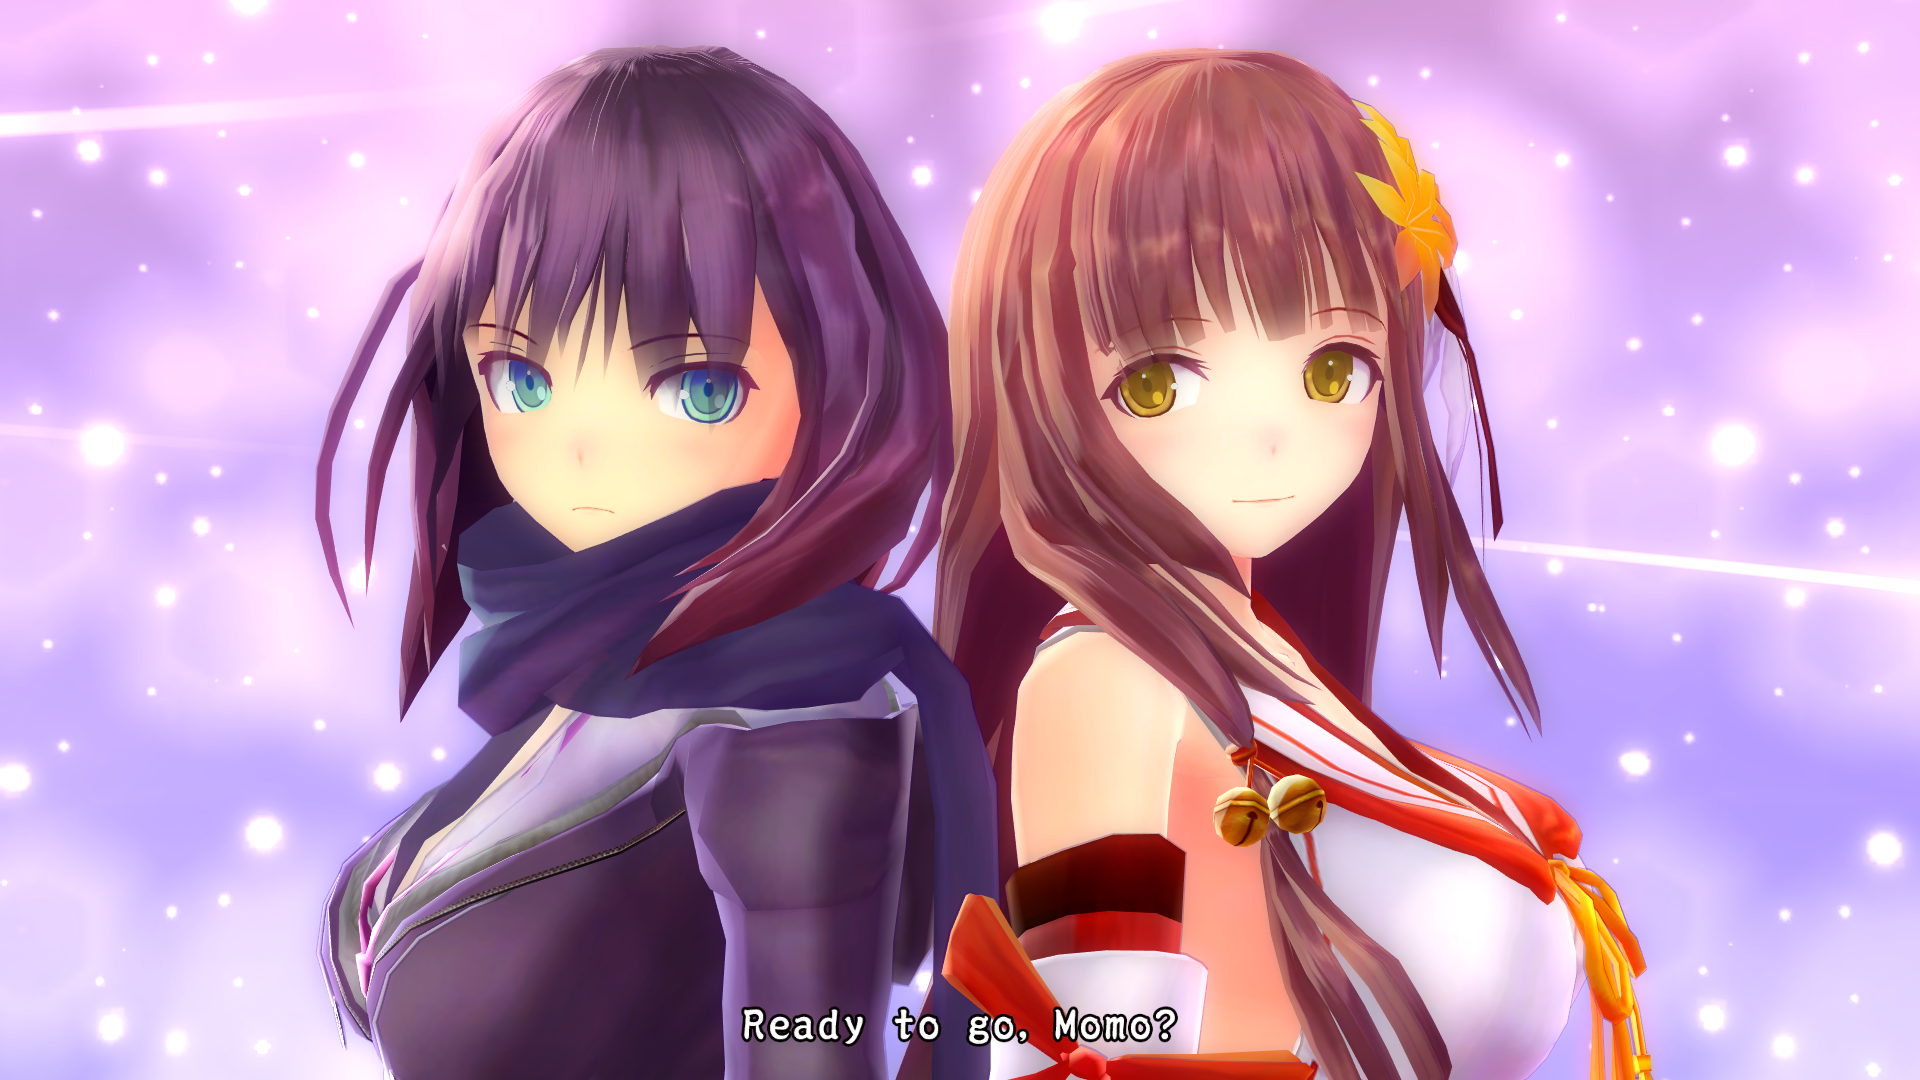 Valkyrie Drive Bhikkhuni Coming to the West